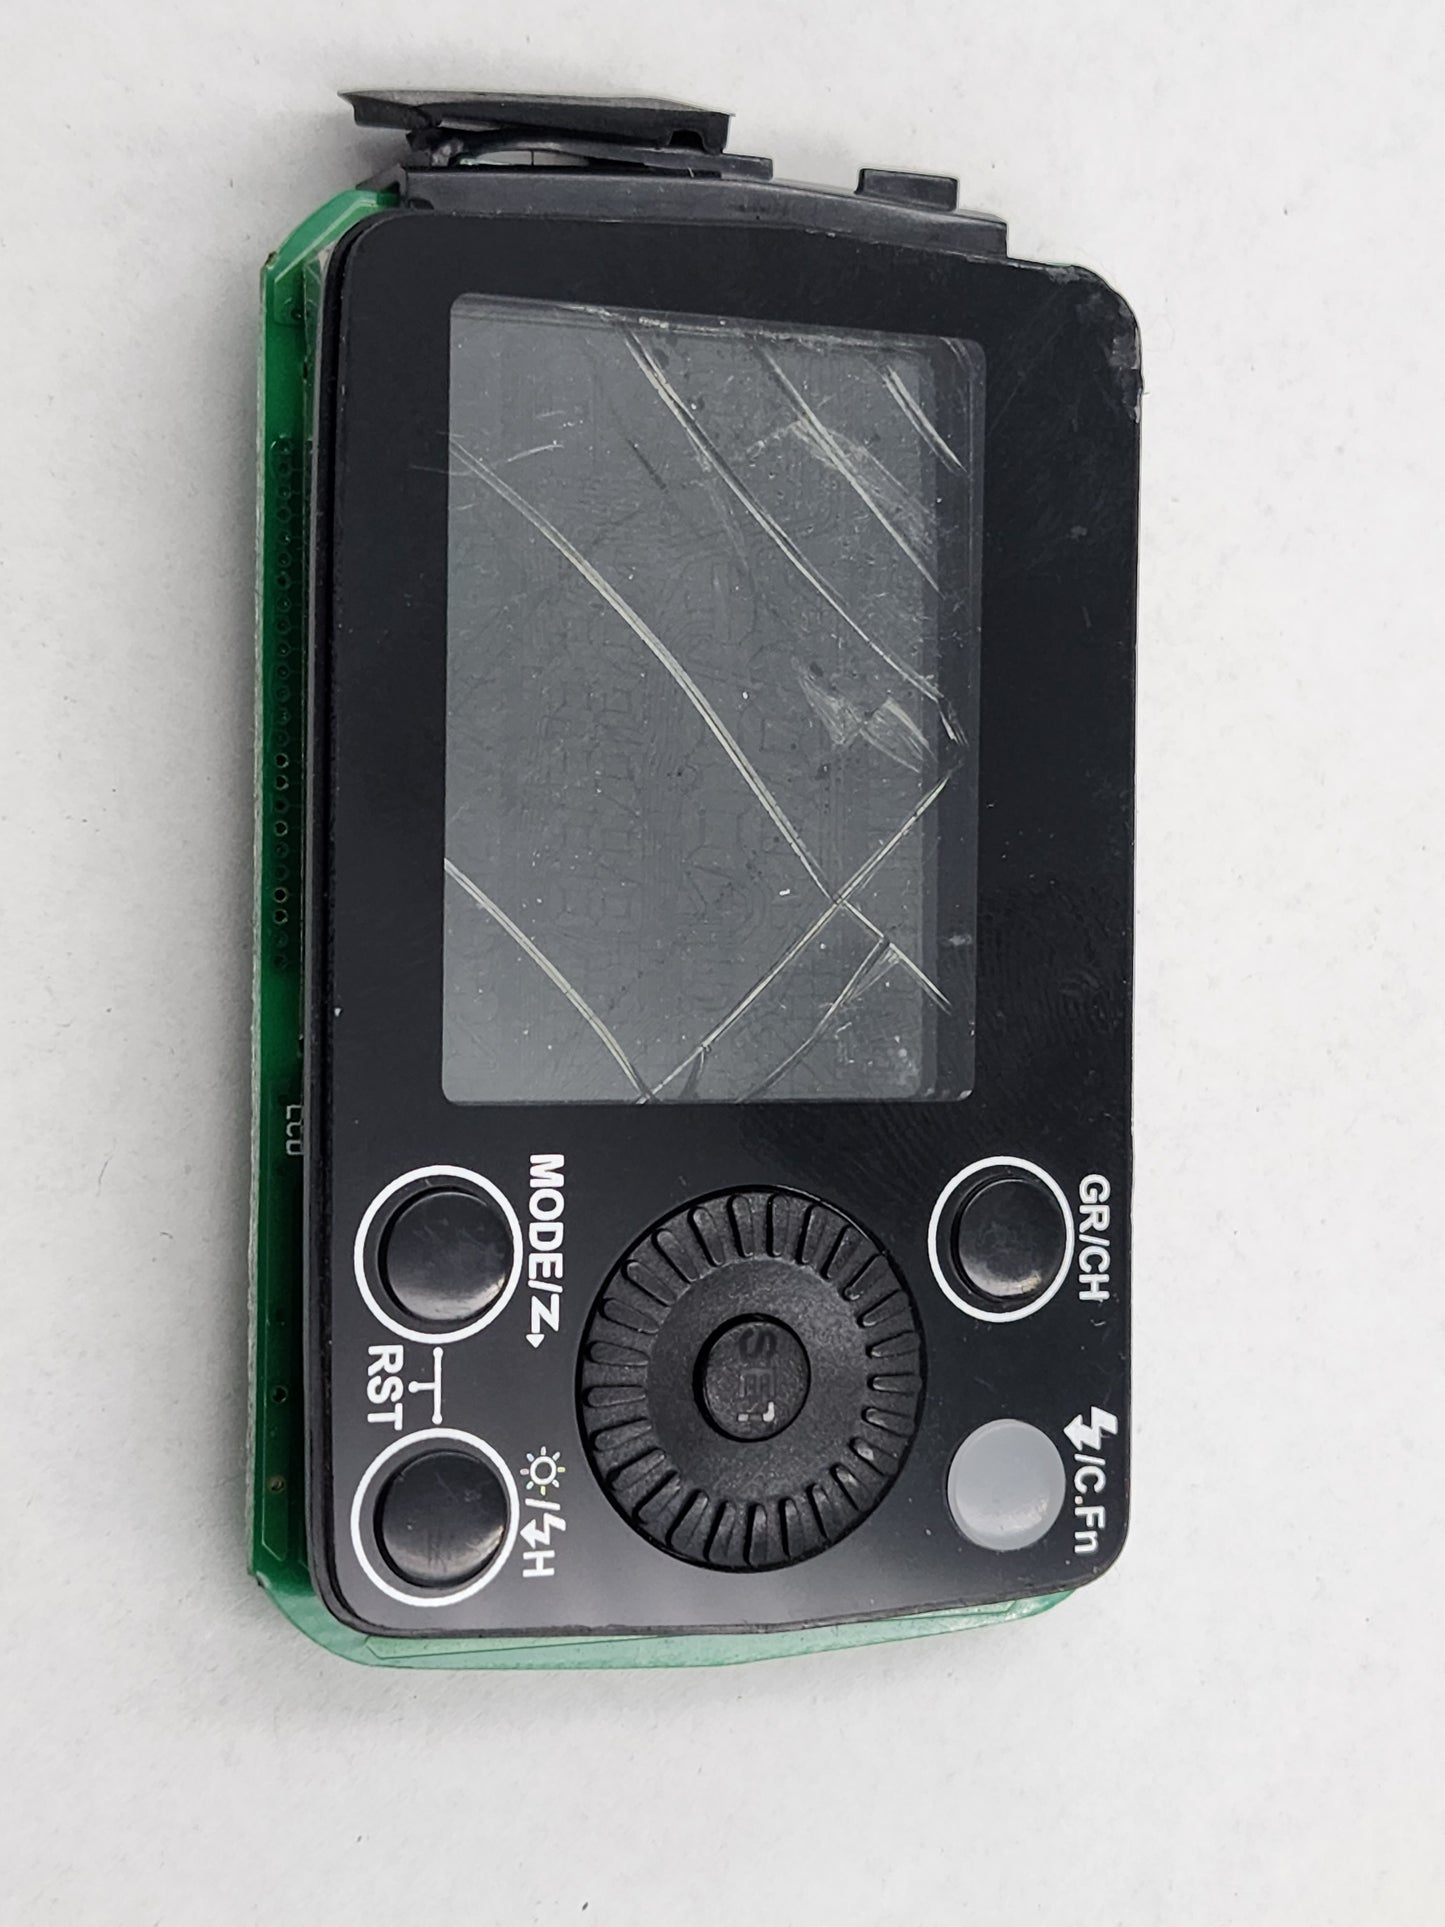 Repair Godox AD200/AD200Pro - Broken LCD or On/Off & Buttons